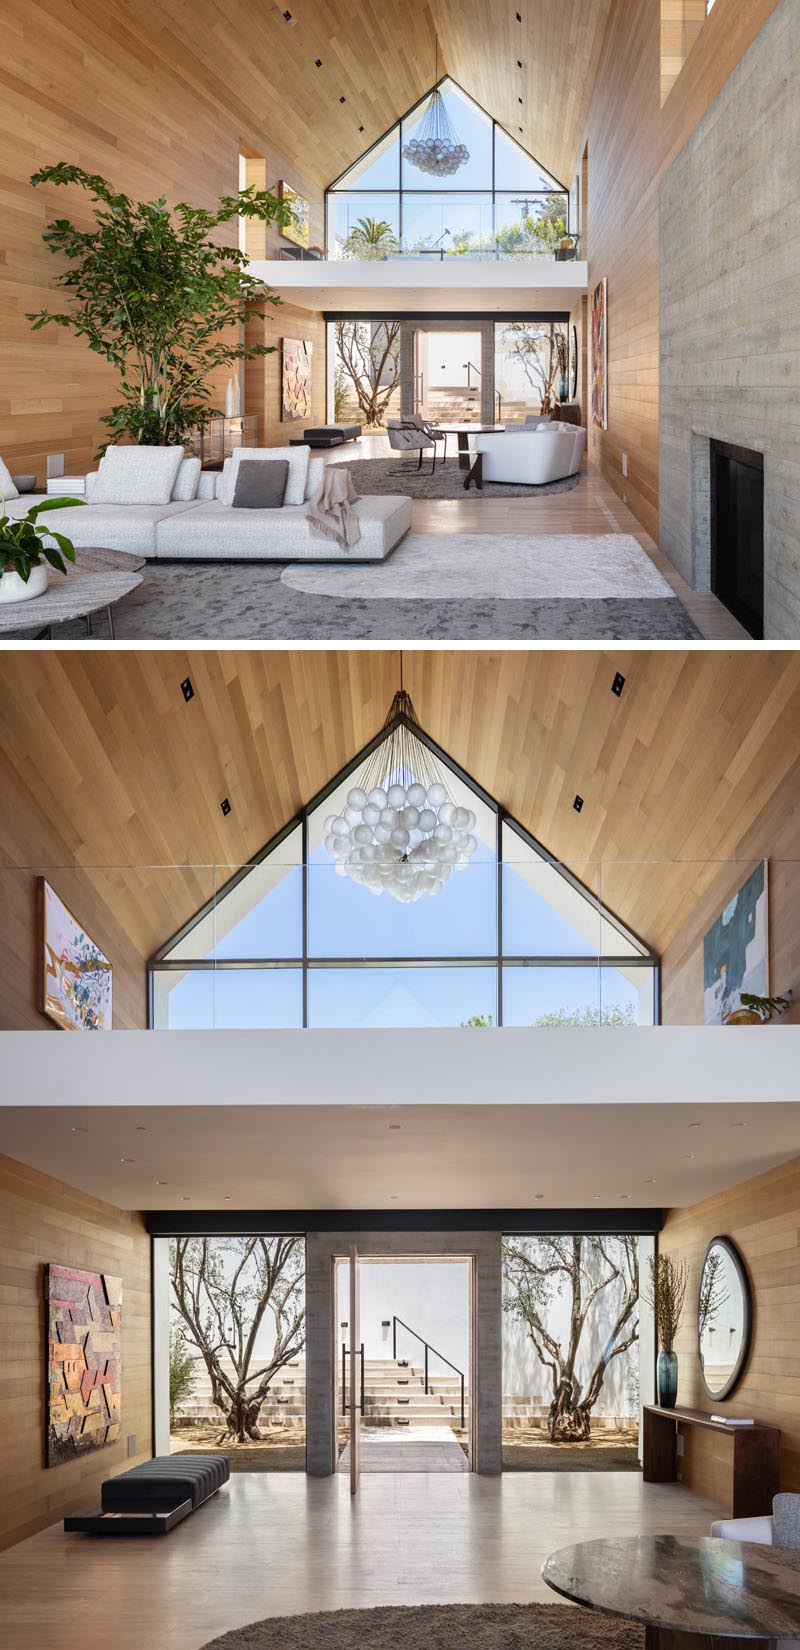 The eye-catching gabled design of this modern barn-inspired house, is easily seen upon approach to the house, and once inside, the wall of windows and doors at the other end of the wood-lined great room showcase the swimming pool and view. #ModernHouse #ModernArchitecture #HouseDesign #GabledRoof #GreatRoom